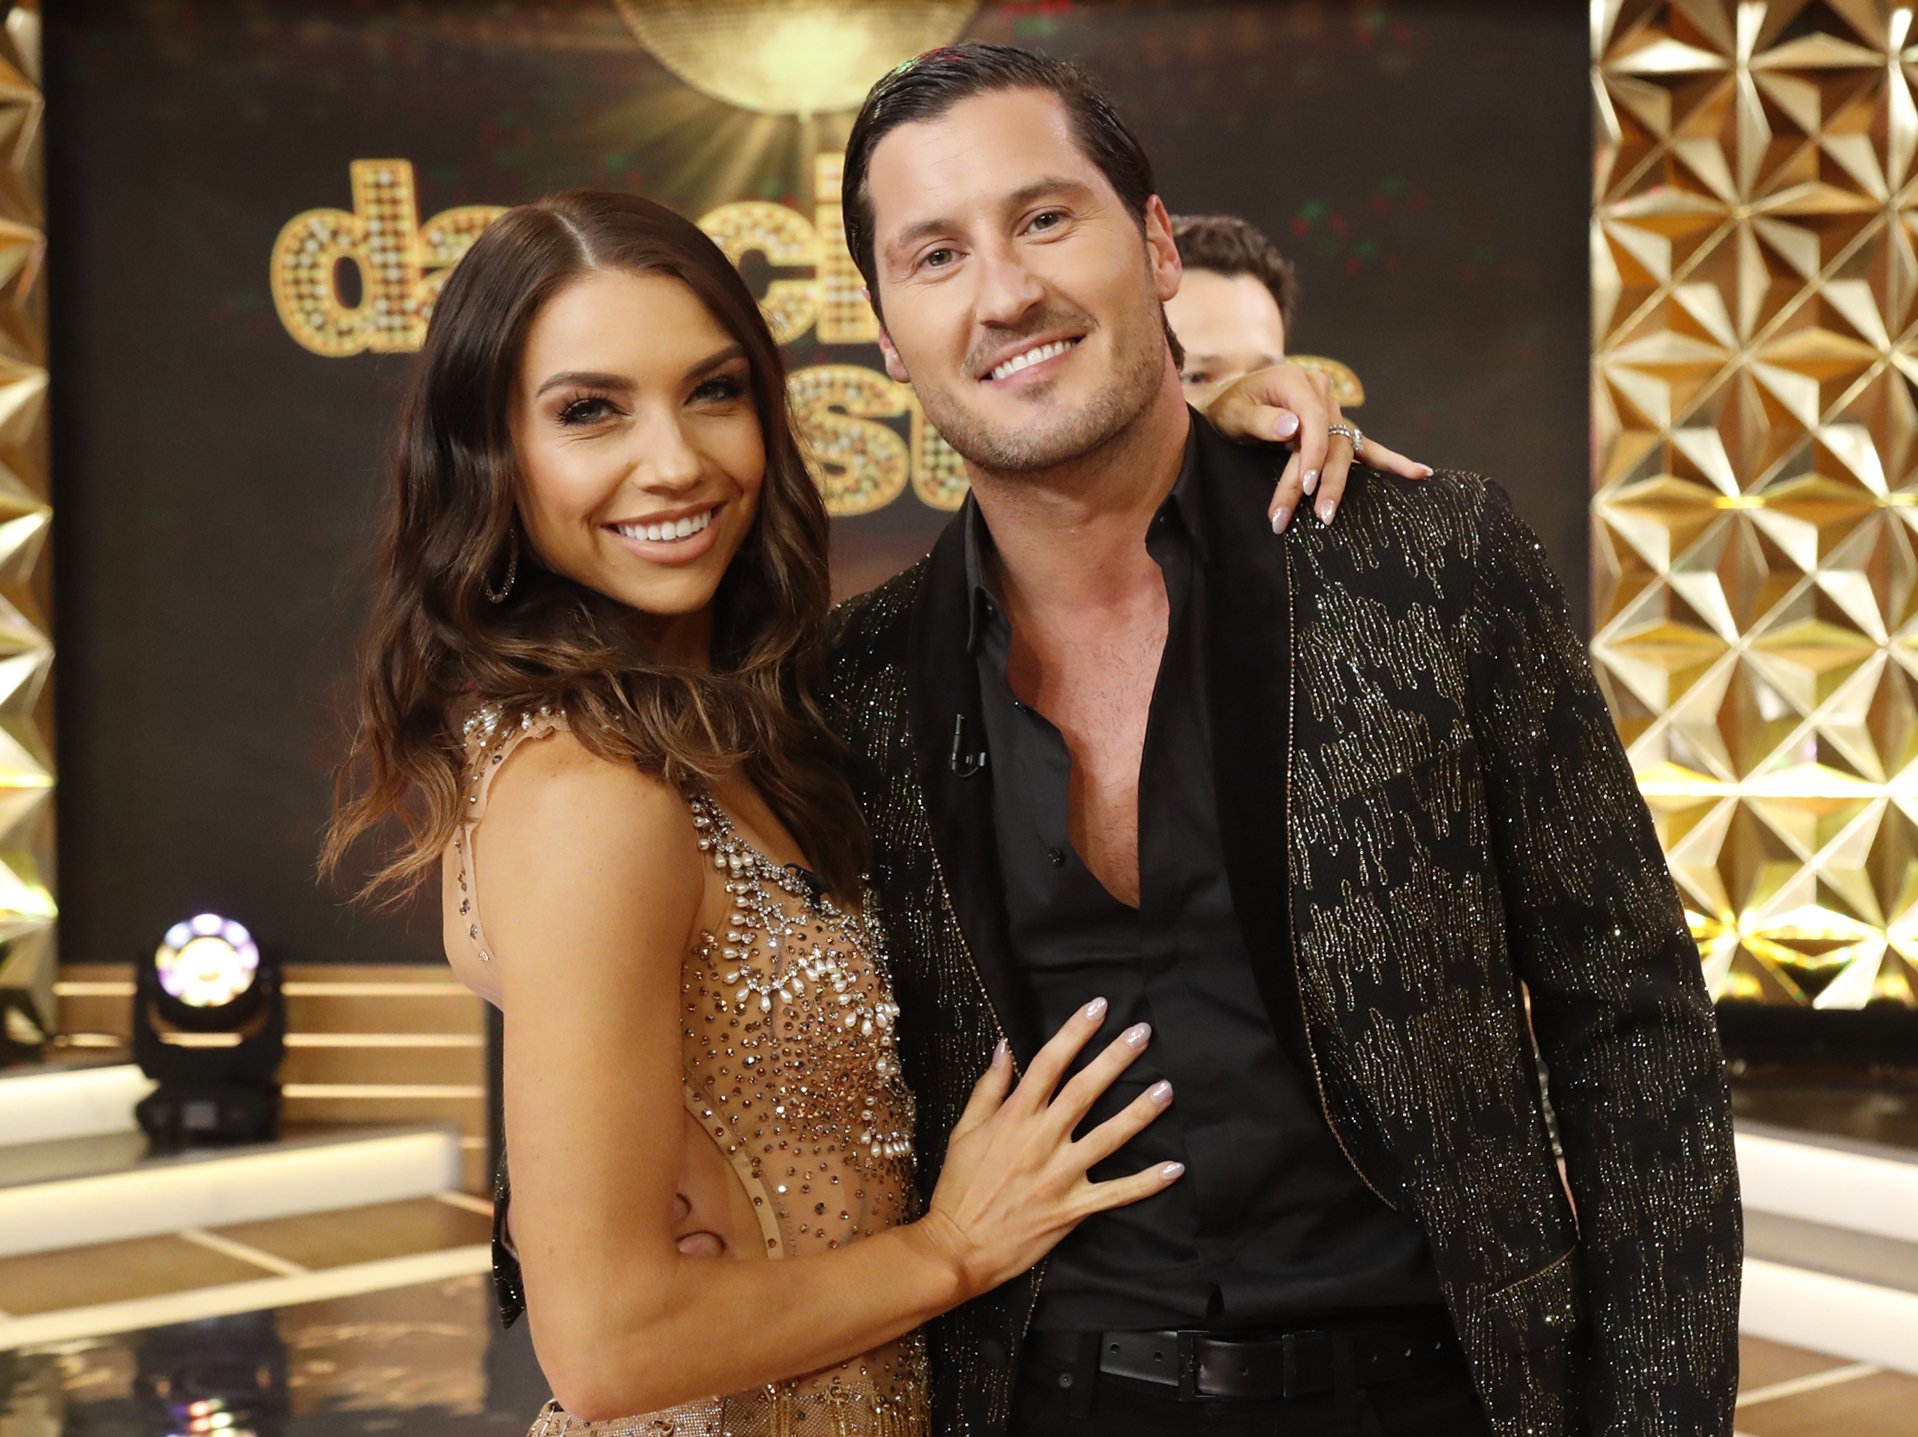 Val Chmerkovskiy and Jenna Johnson as the 2019 cast of Dancing with the Stars is revealed LIVE on Good Morning America Wednesday, August 21, 2019 on ABC | Source: Getty Images